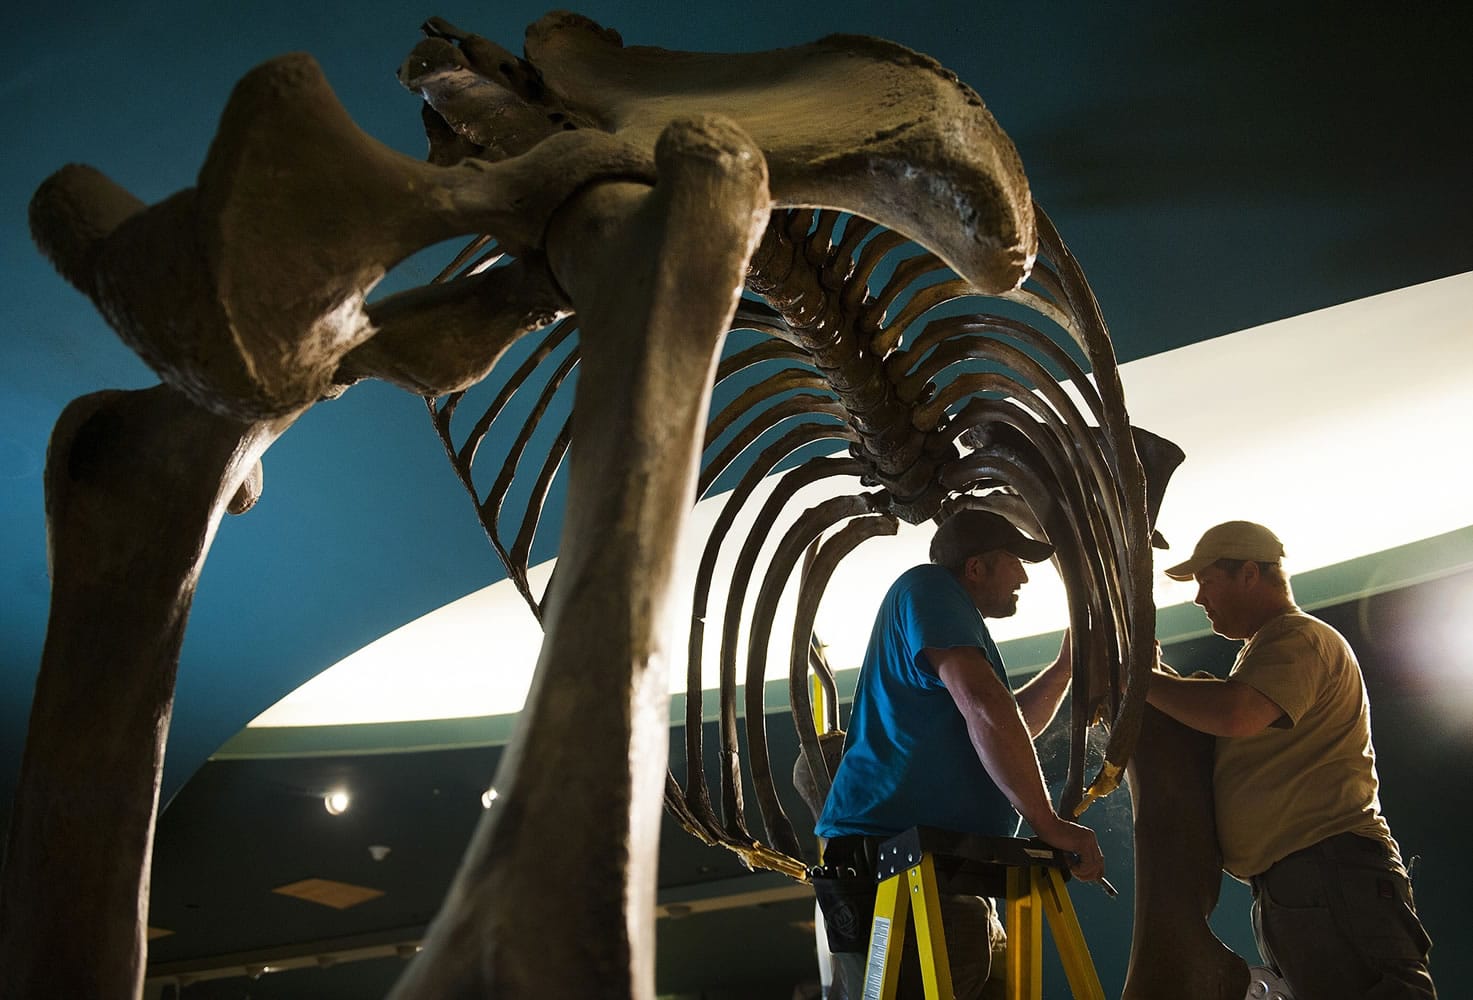 Photos by Lisa Davidson/The Washington Post
Brett Crawford, left, and Matt Fair deconstruct the skeleton of a woolly mammoth at the Smithsonian Museum of Natural History in Washington, D.C., on Monday. It's all part of an overall renovation of the museum's fossil hall.